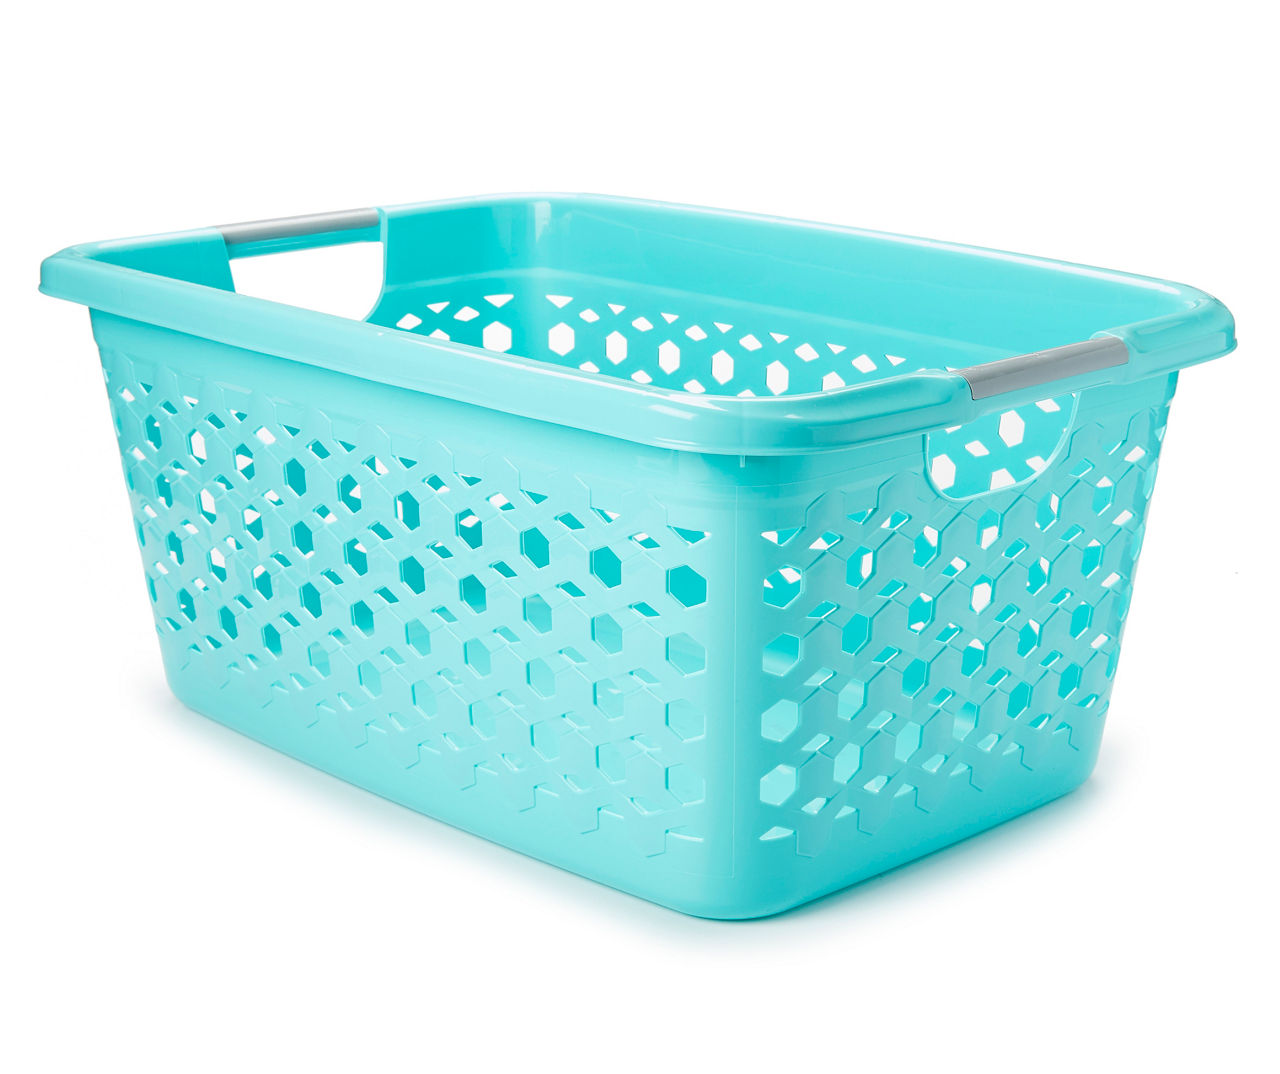 Home+Solutions Teal Large Plastic Baskets, 2 Count